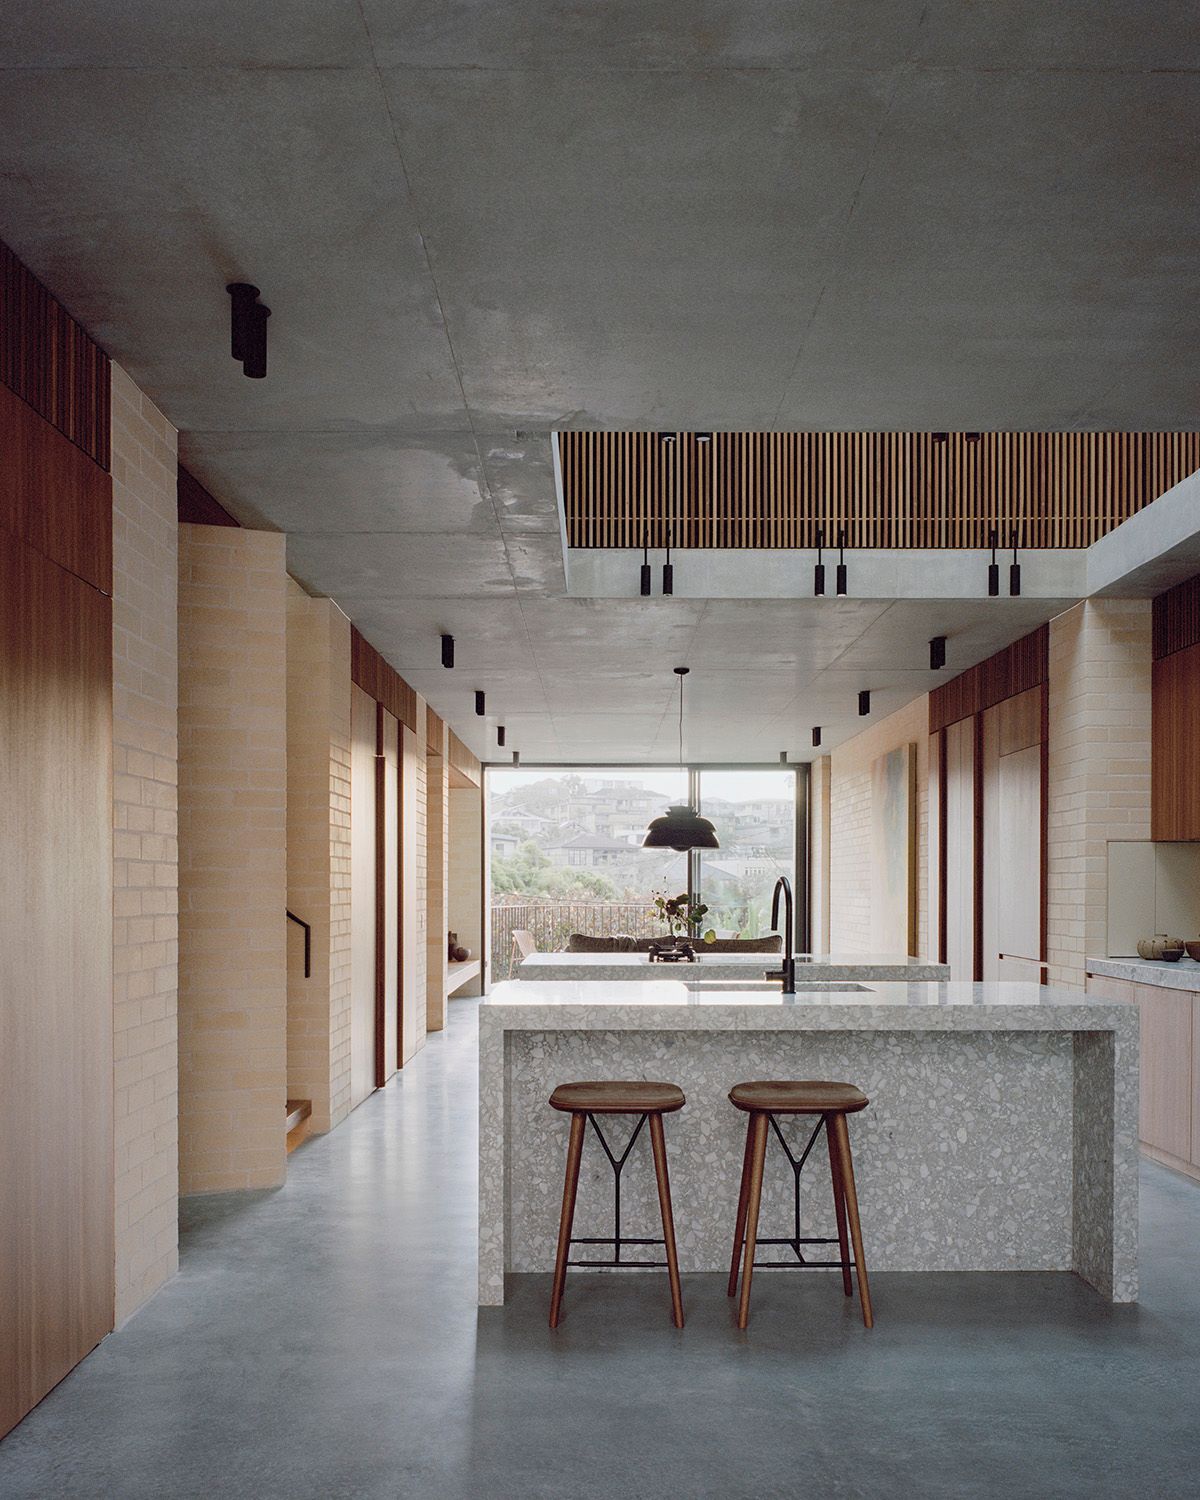 Bronte House by Tribe Studio Architects showing internal view of kitchen space with a void over